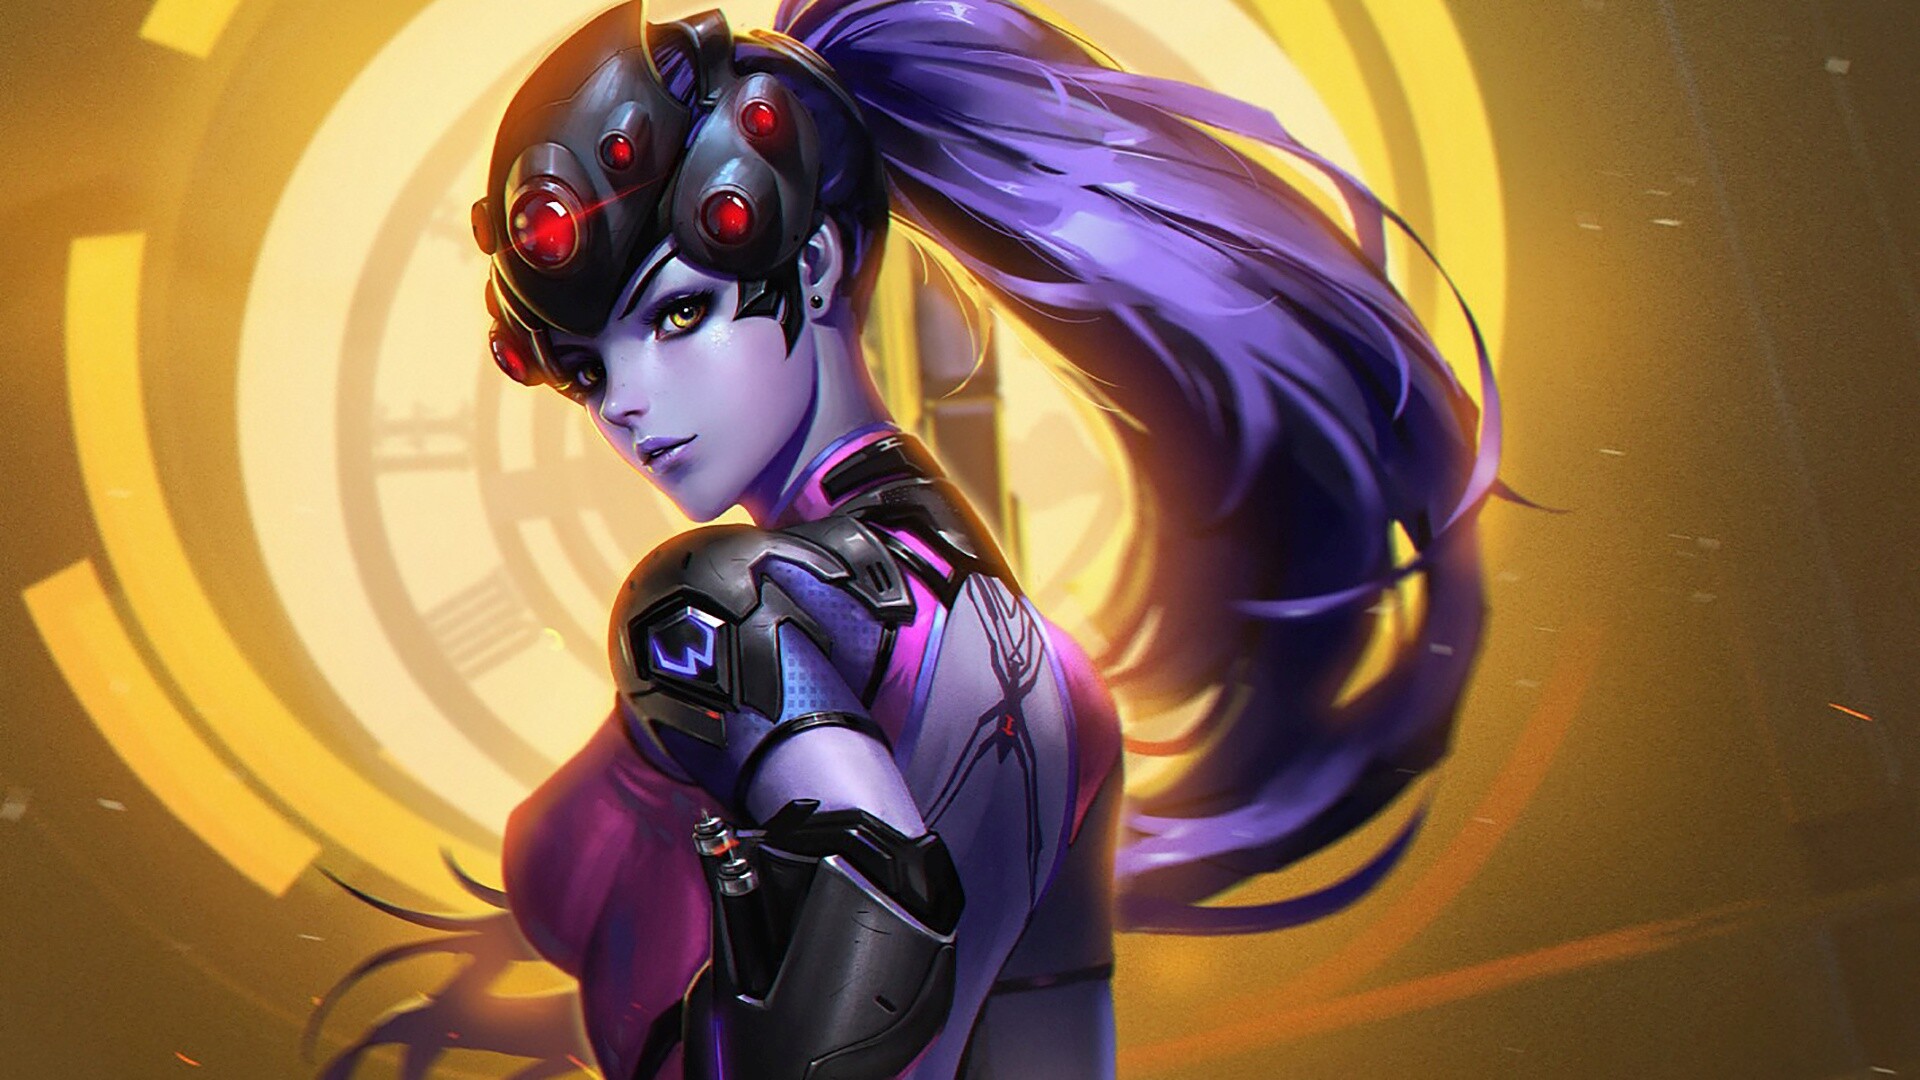 Overwatch: Widowmaker, Her ultimate ability is Infra-Sight. 1920x1080 Full HD Background.